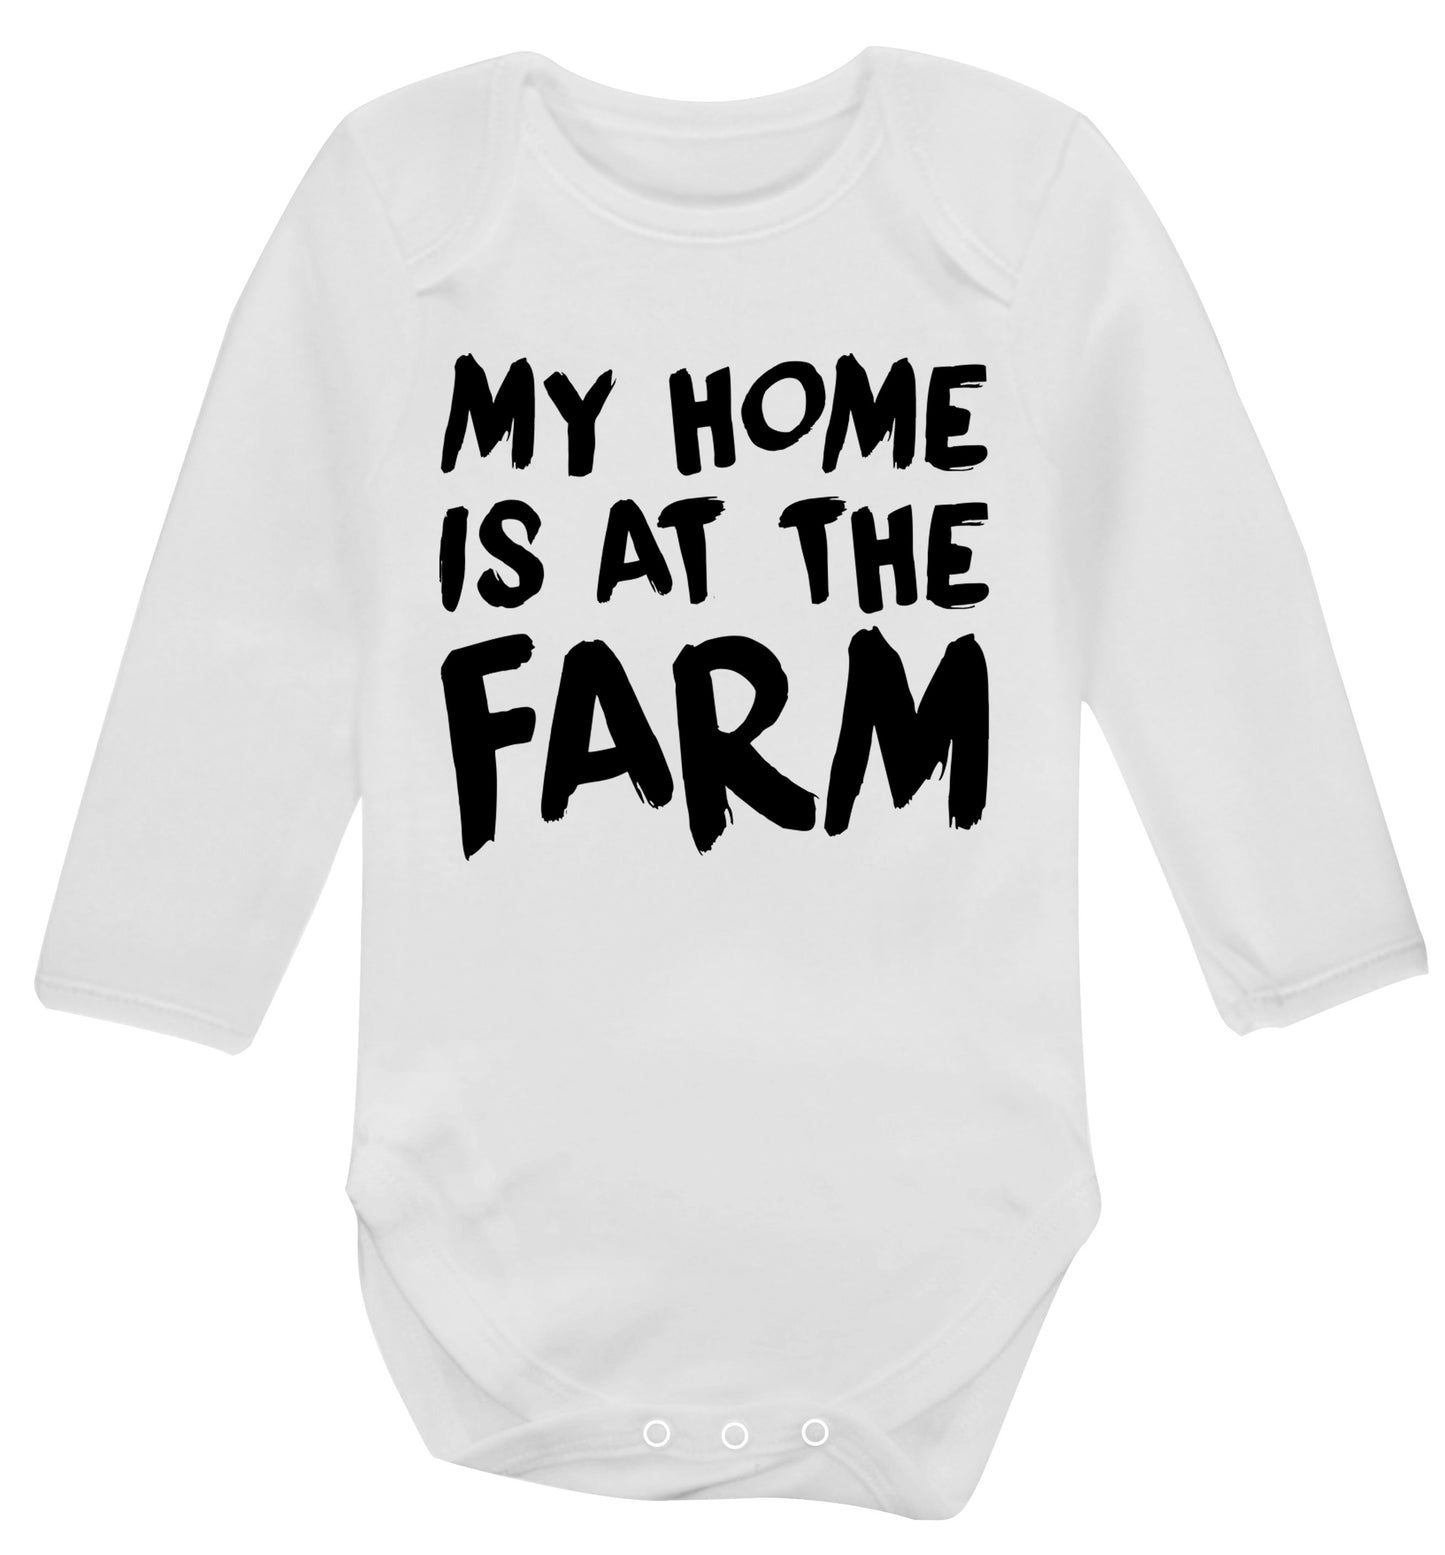 My home is at the farm Baby Vest long sleeved white 6-12 months